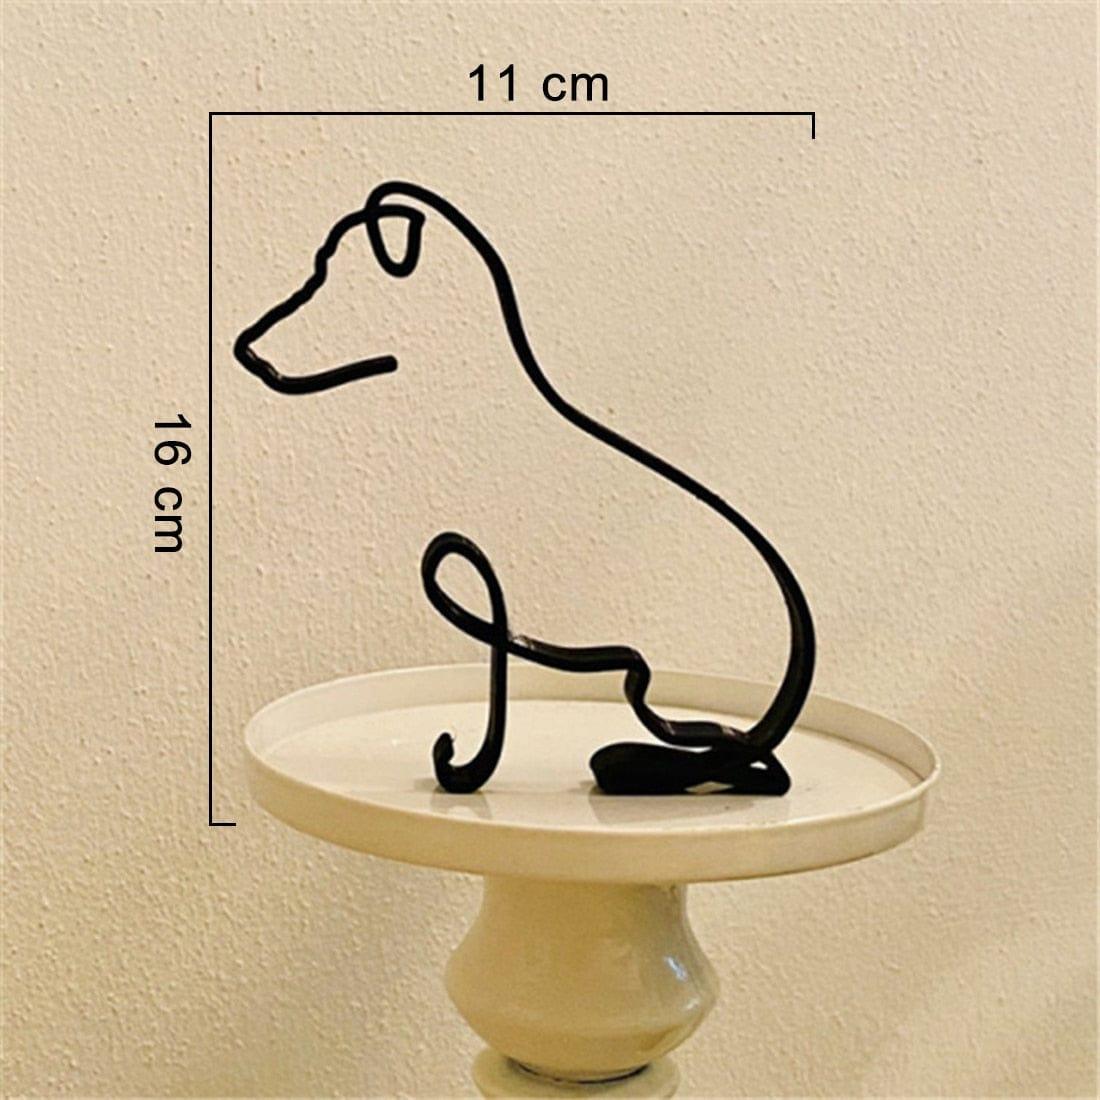 Shop 0 B Dog Art Sculpture Simple Metal Dog Abstract Art Sculpture for Home Party Office Desktop Decoration Cute Pet Dog Cats Gifts Mademoiselle Home Decor